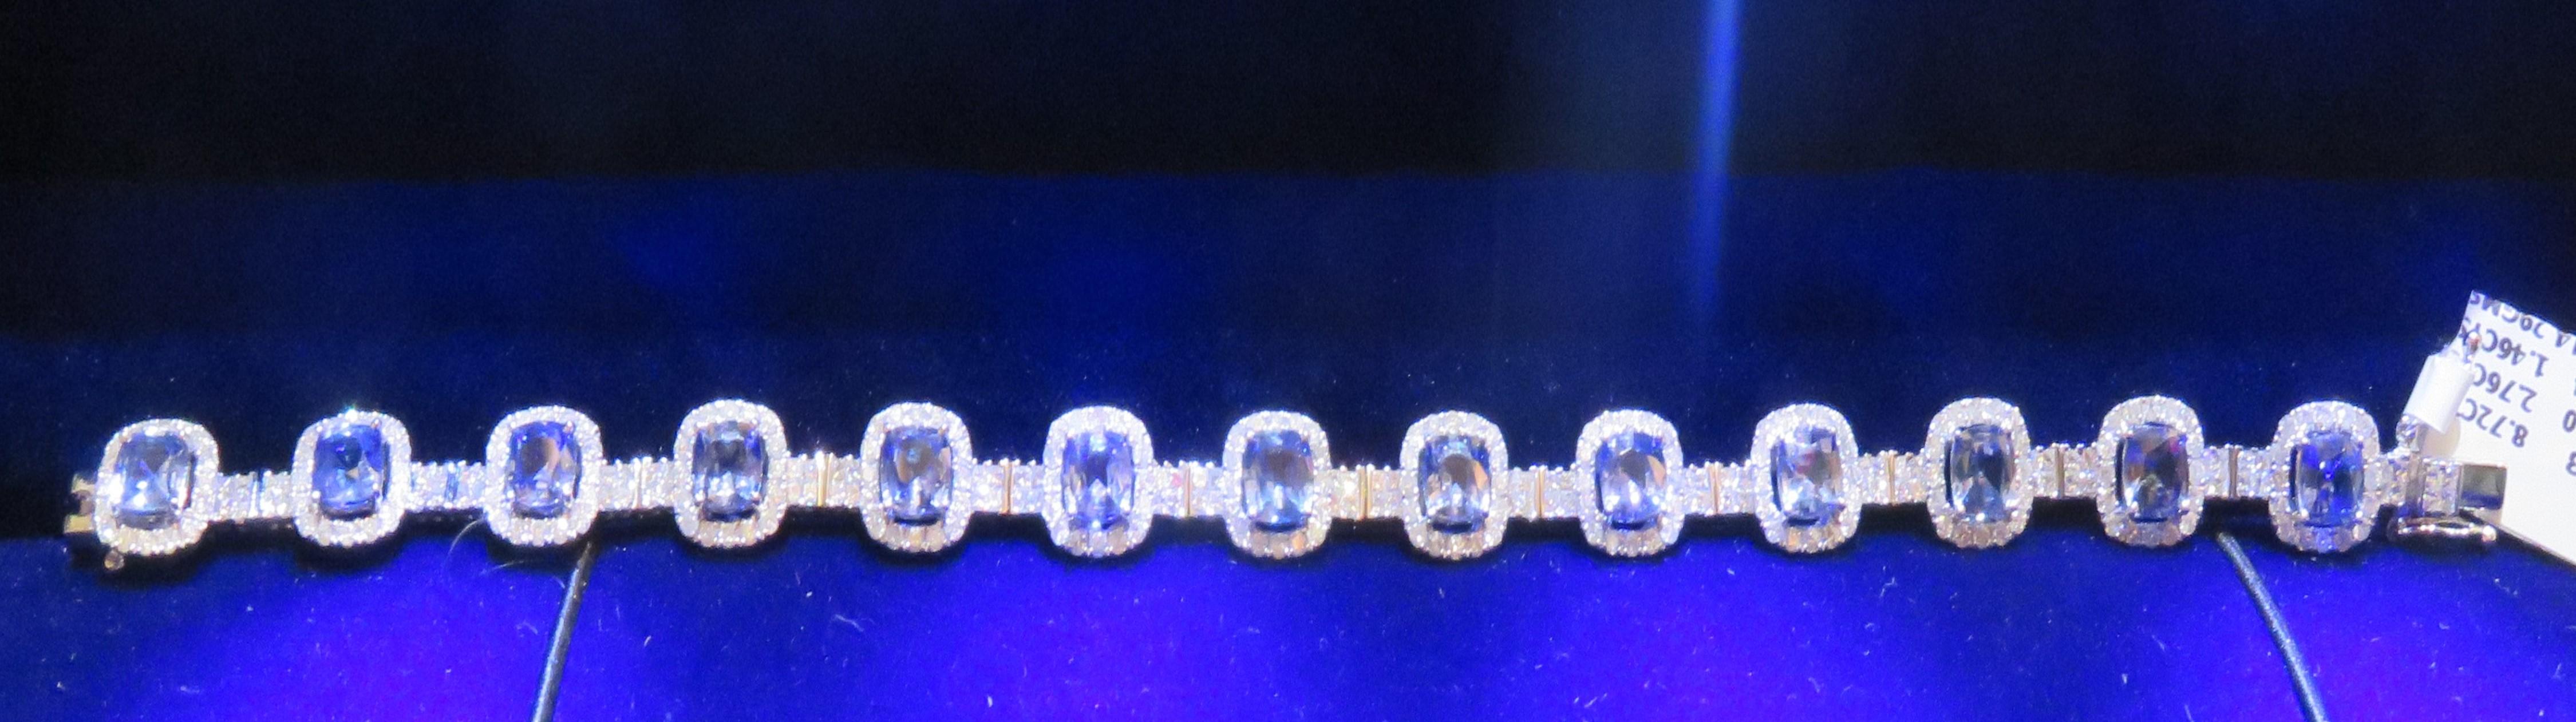 The Following Item we are offering are these Extremely Rare Beautiful 18KT Gold Fine Large Fancy Blue Sapphire Fine Magnificent Diamond Bracelet!! These Rare Magnificent Sapphires are Gorgeous and Glittering and are Beautiful!! The Diamonds are of